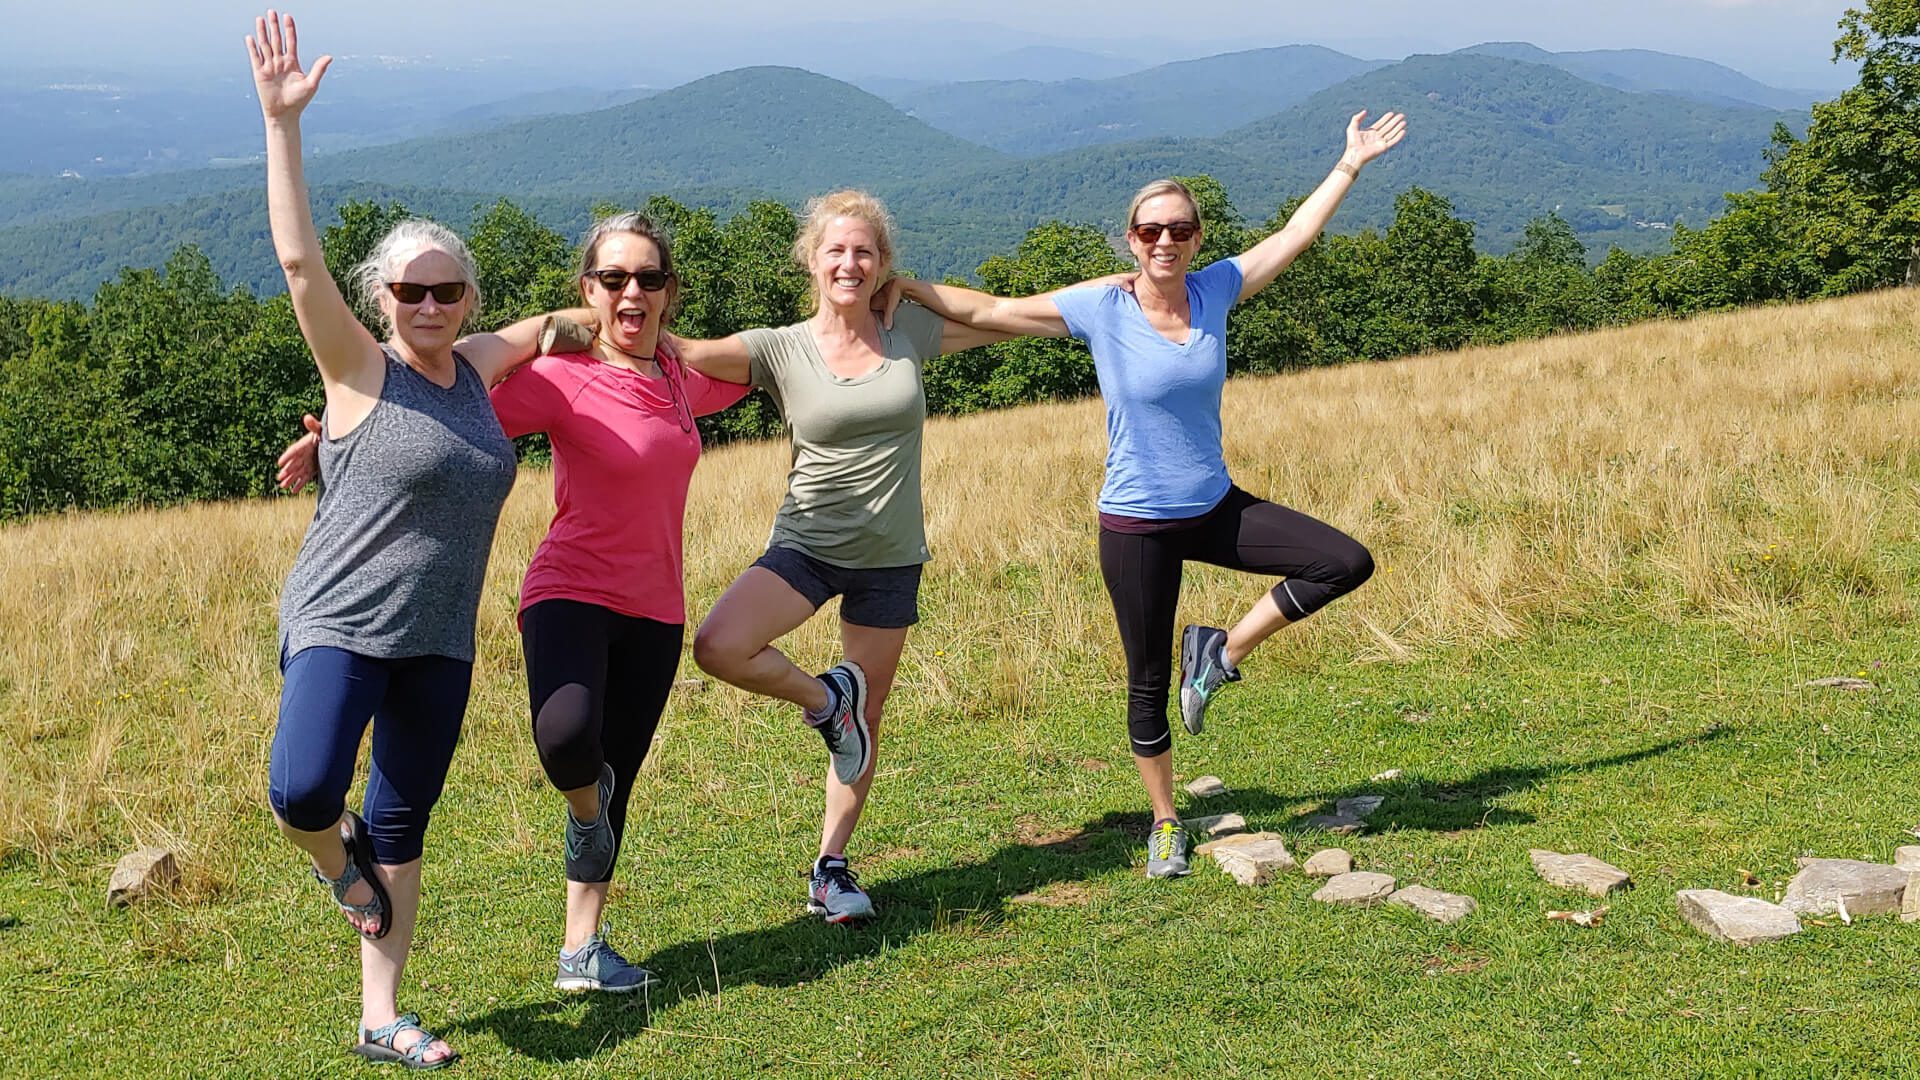 Summer mountaintop yoga hike in Asheville, NC featuring four women in tree pose